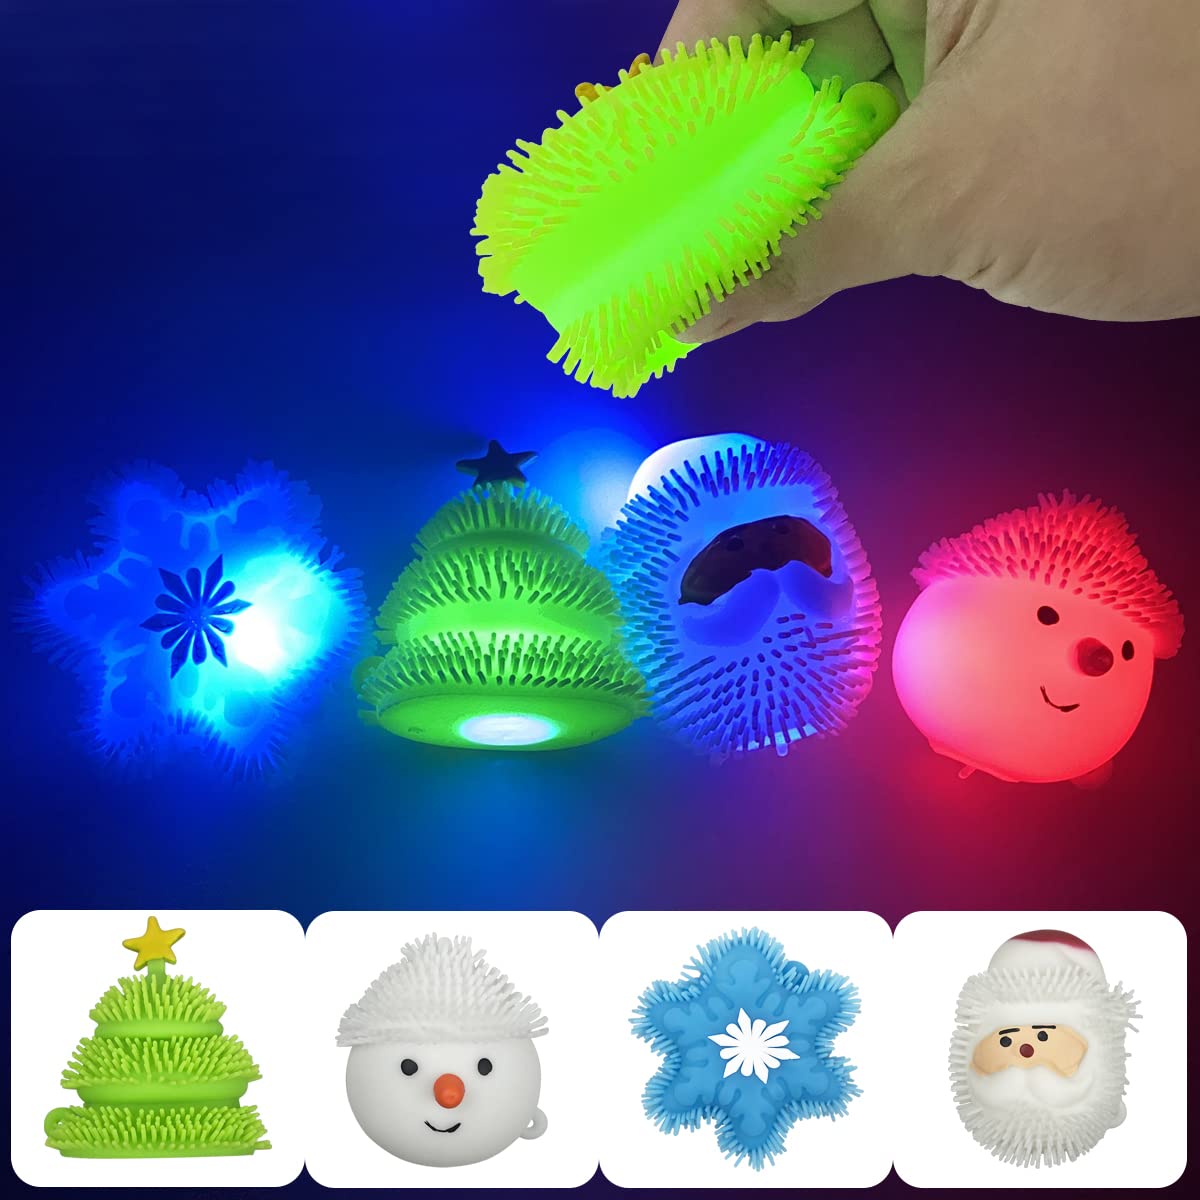 JoFAN 4 Pack Christmas Light Up Spiky Balls Squeeze Balls Toys for Kids Boys Girls Toddlers Christmas Stocking Stuffers Party Favors Gifts